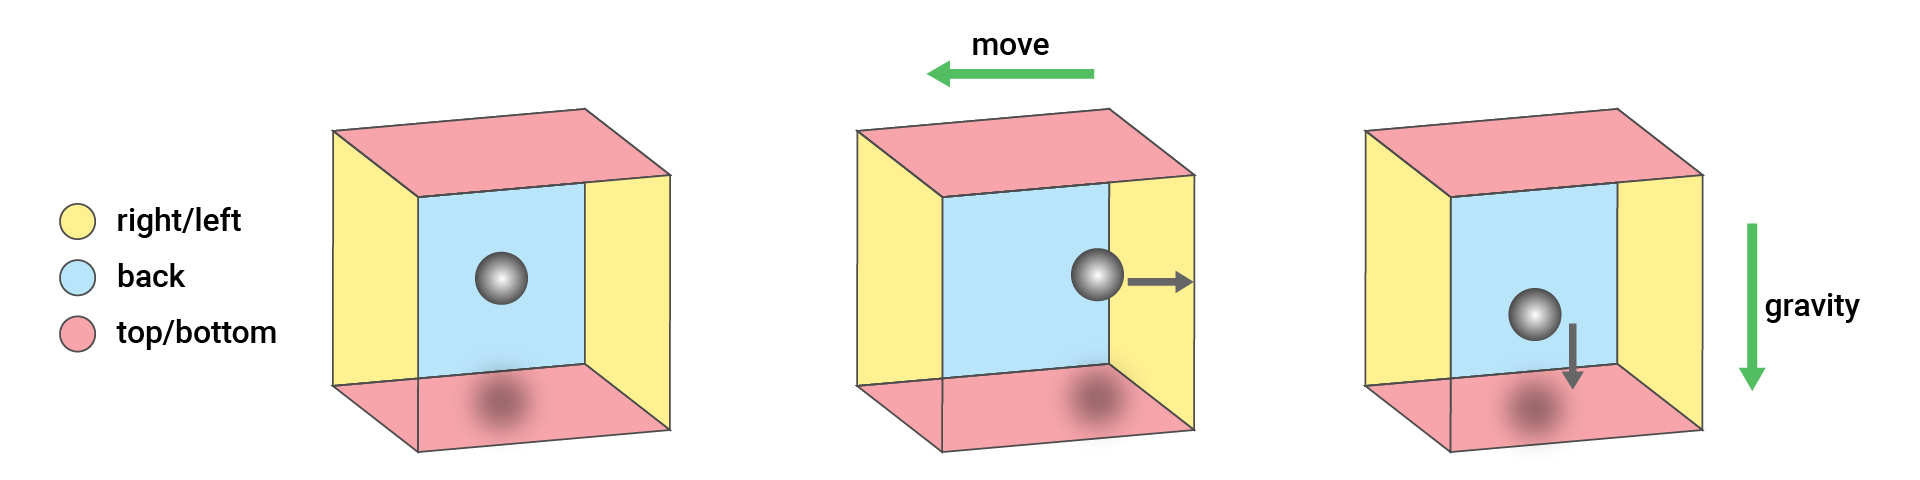 A ball in box to show the acceleration